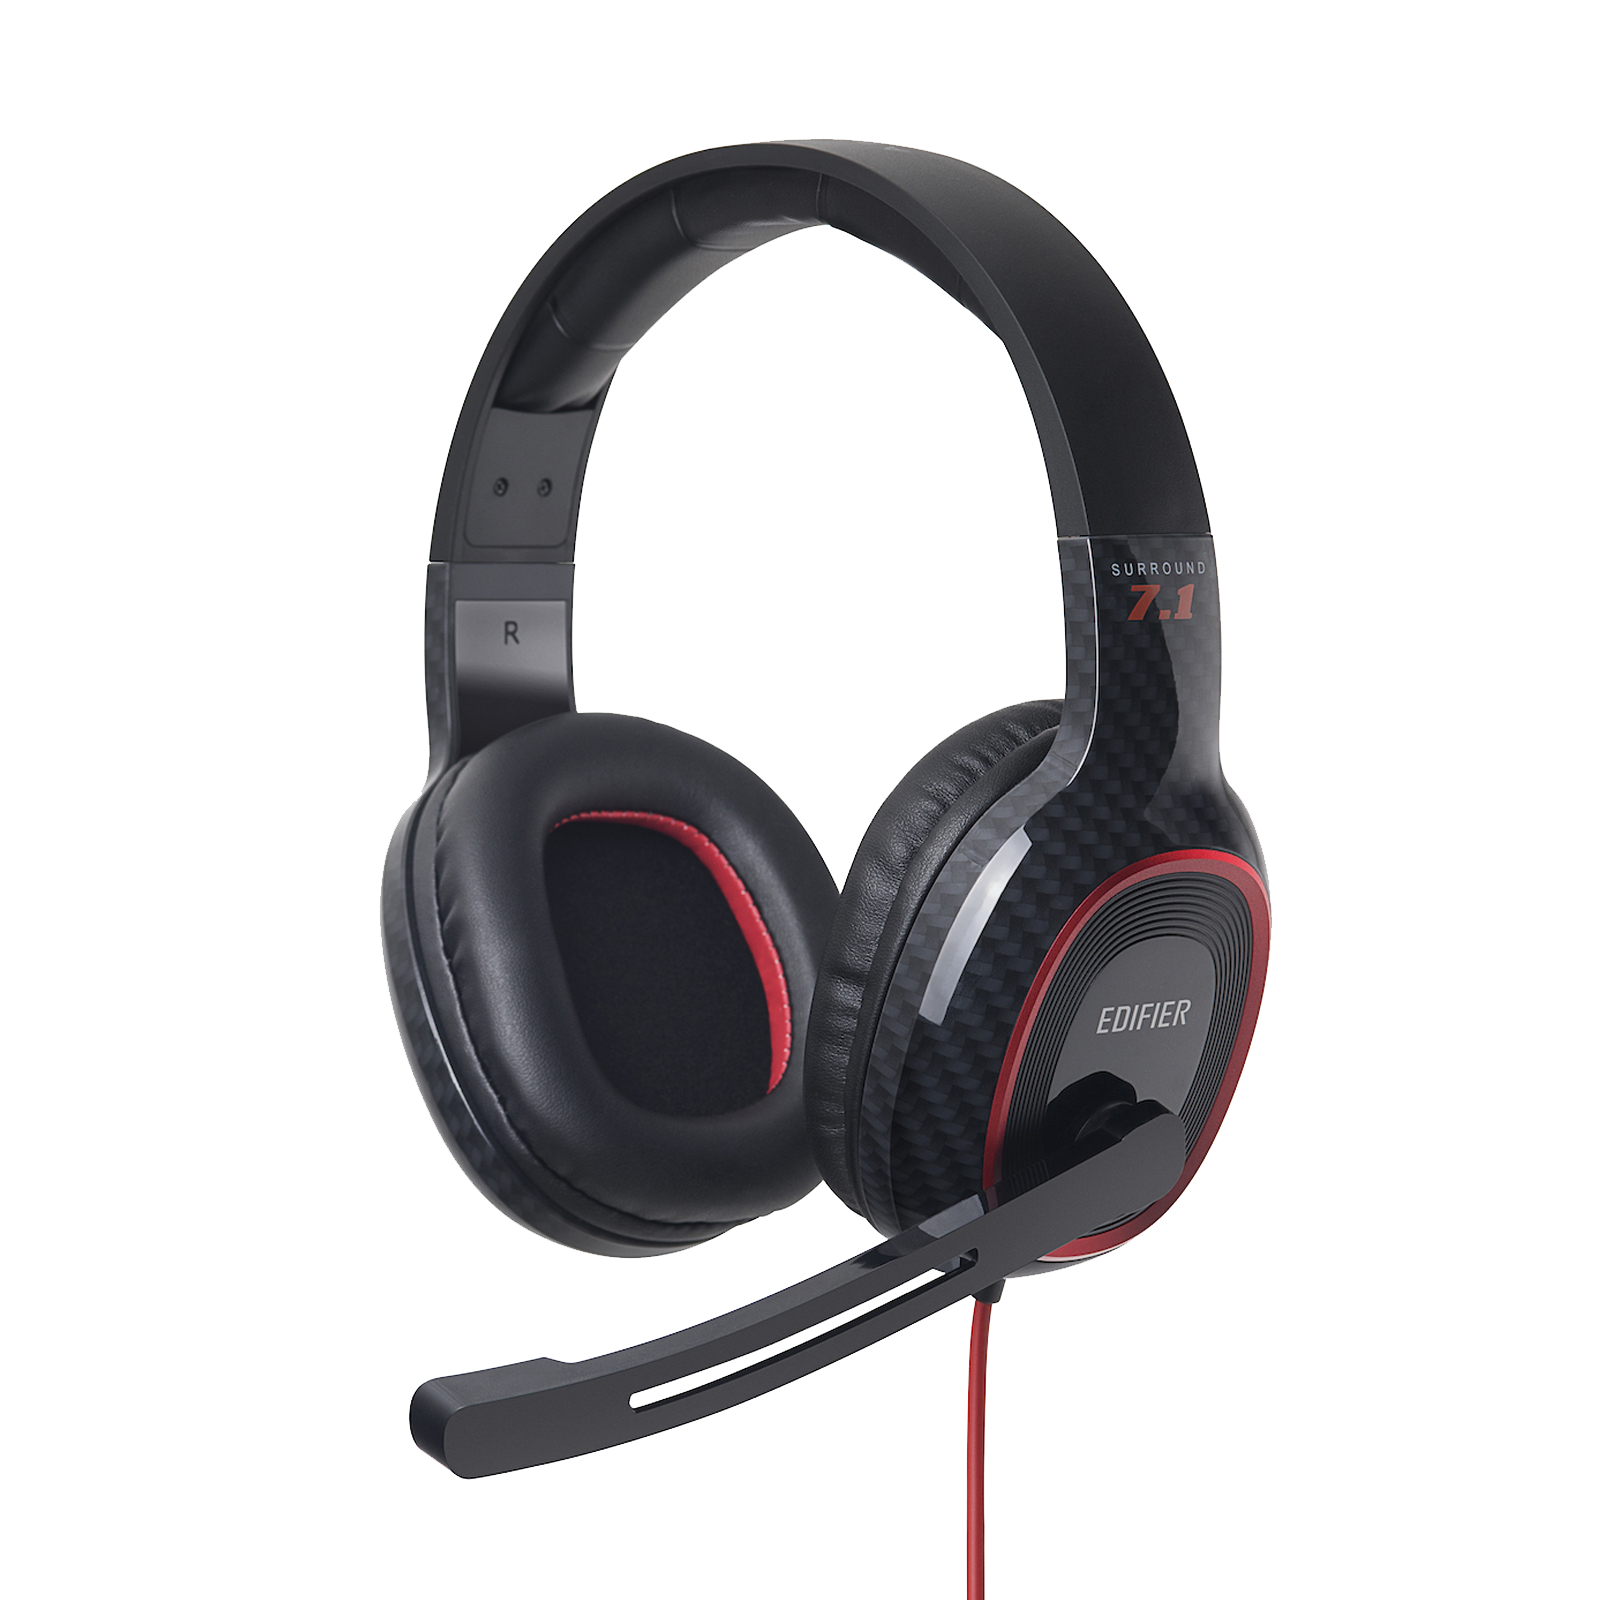 G20 Professional Gaming Headset Boom Microphone Virtual Surround Sound